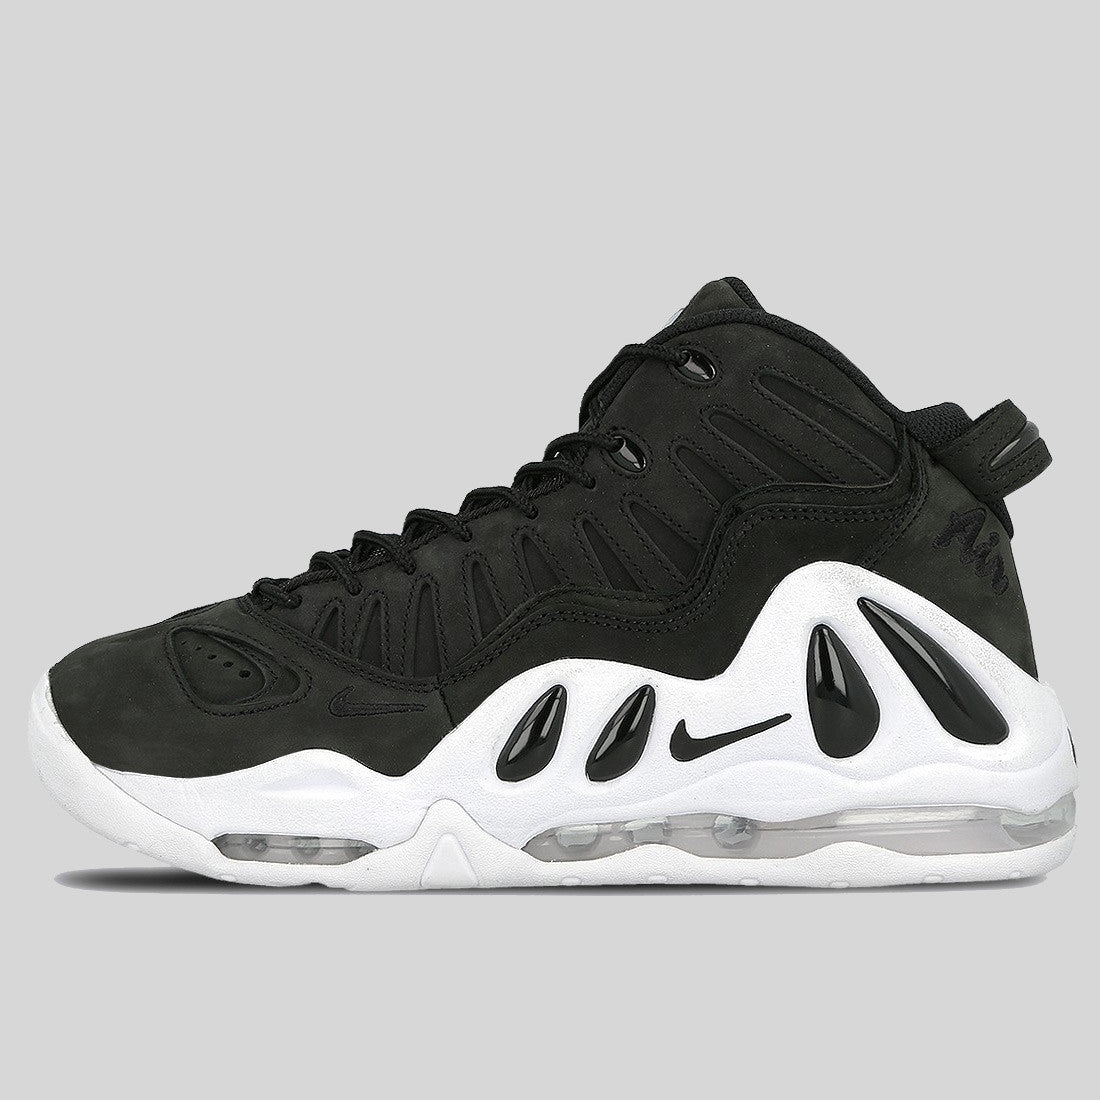 nike air max uptempo 97 black pack